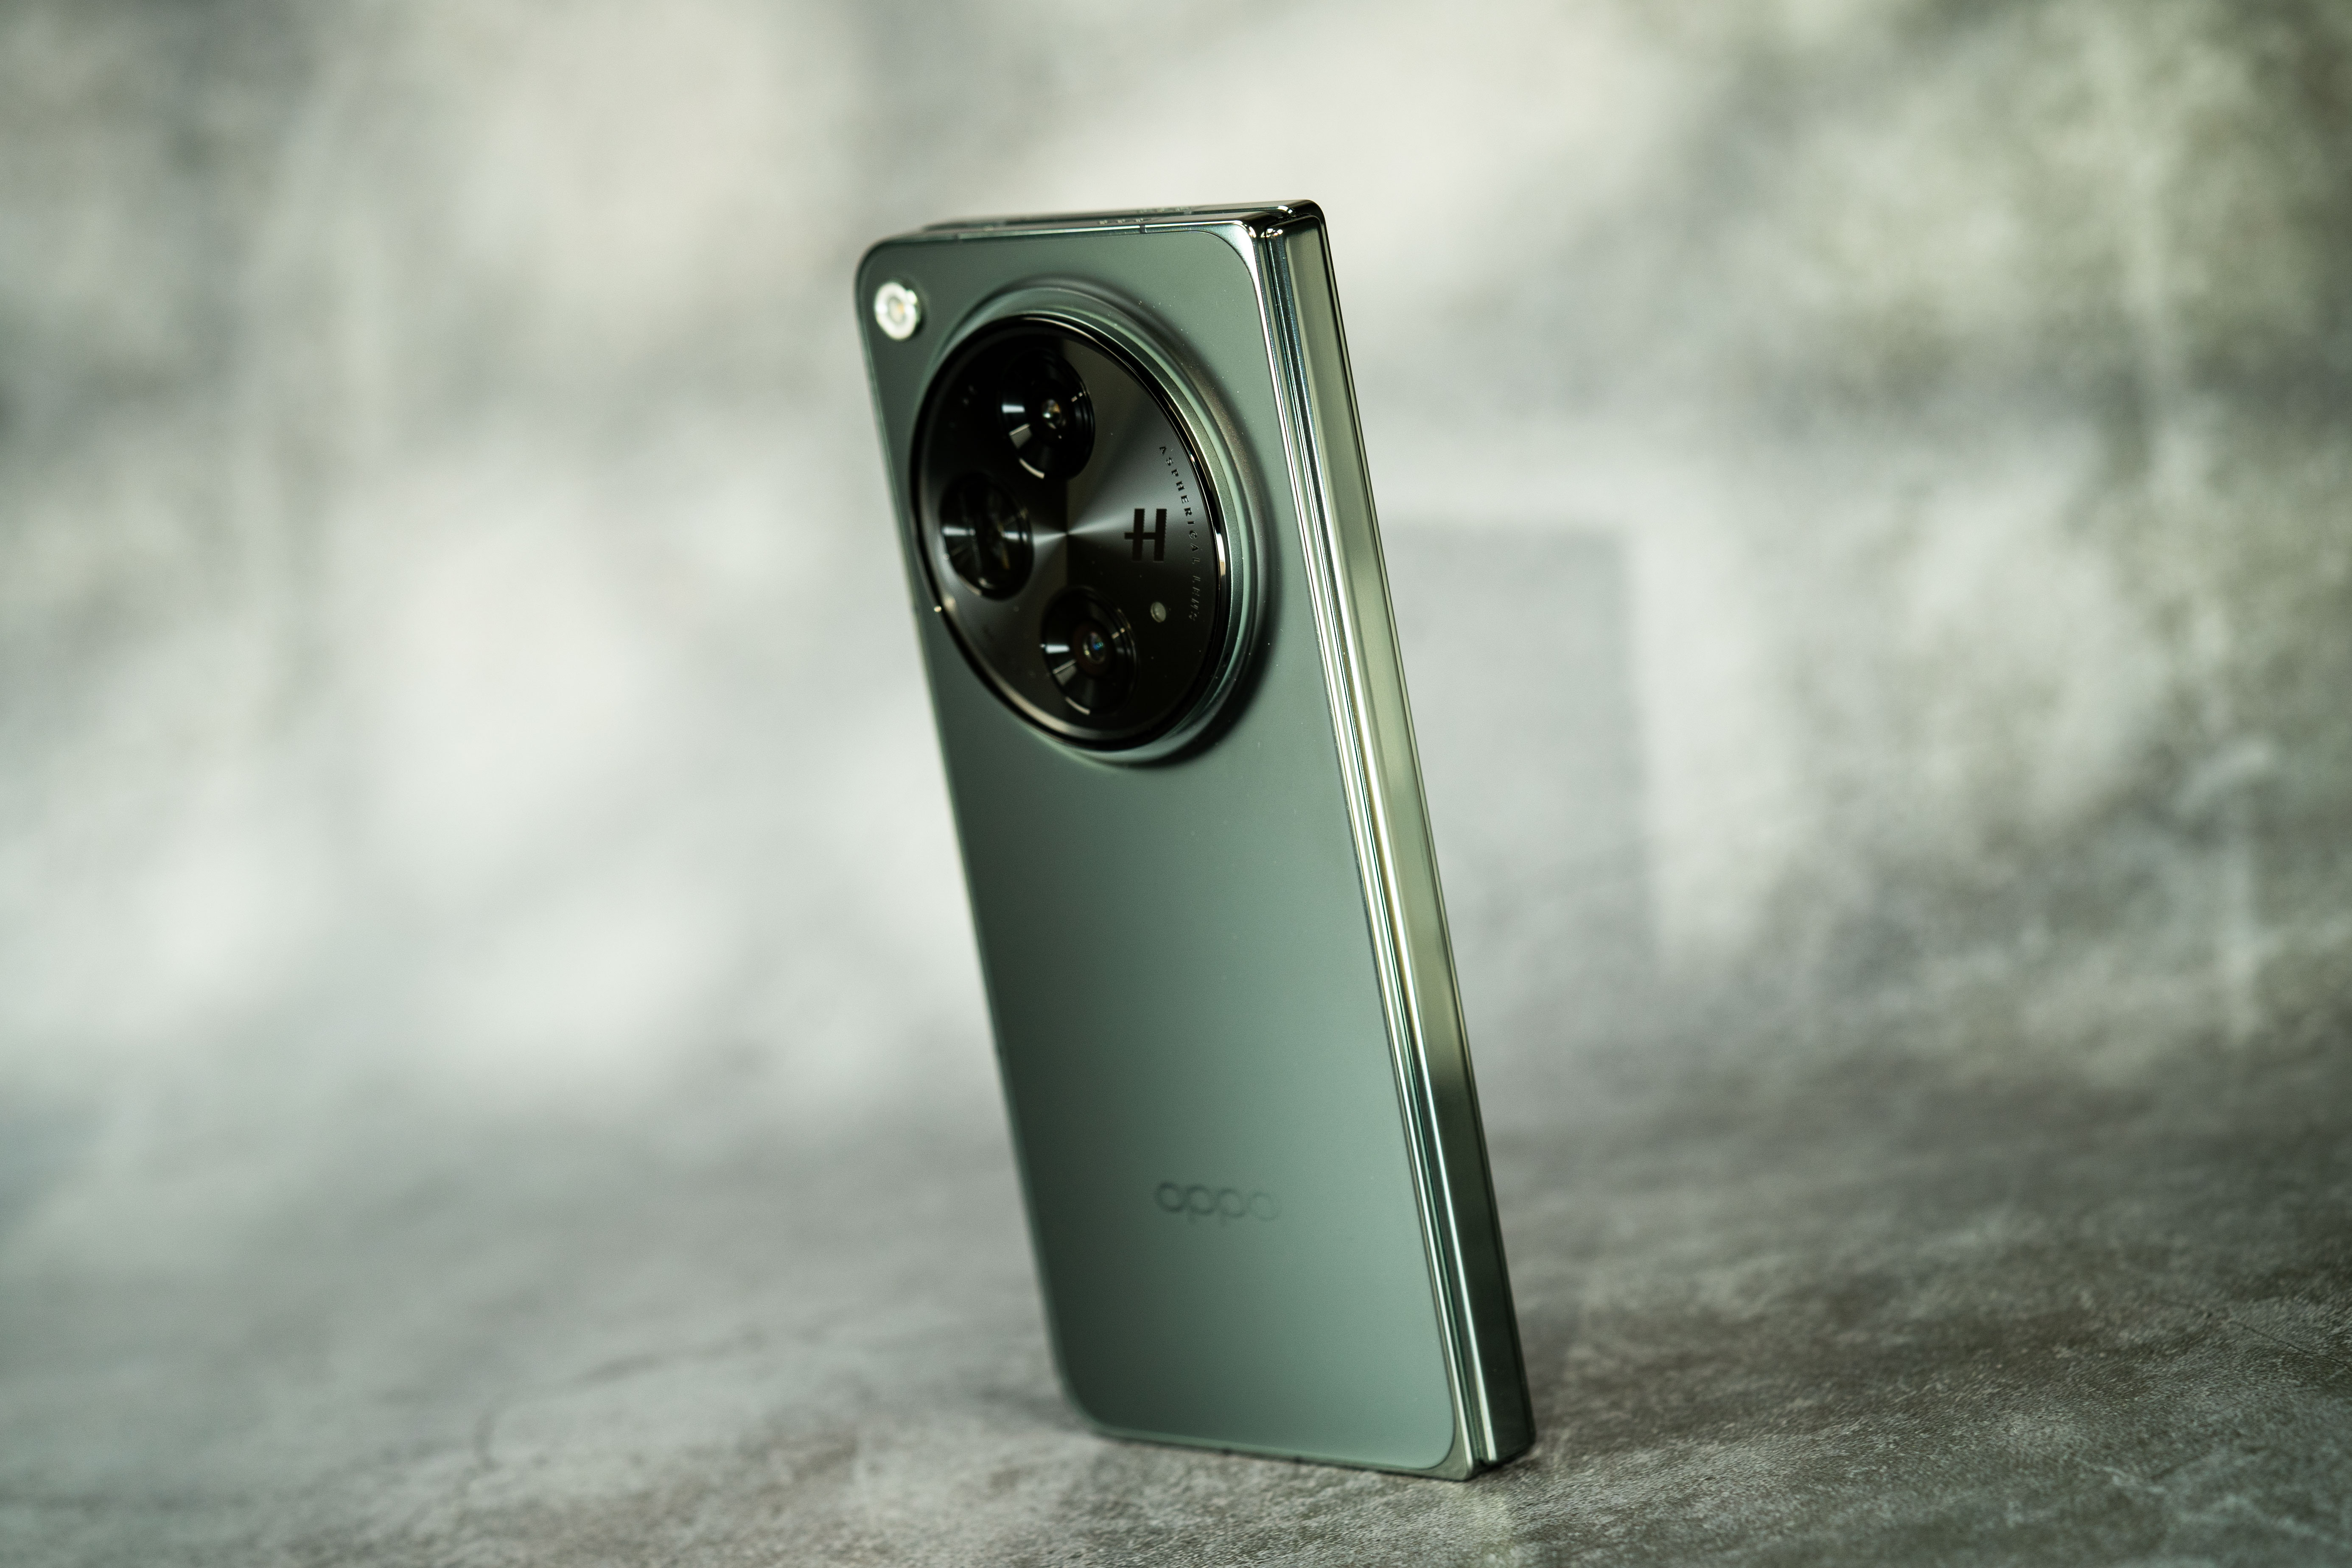 Oppo Find N3 Flip lands globally with the best camera kit on a